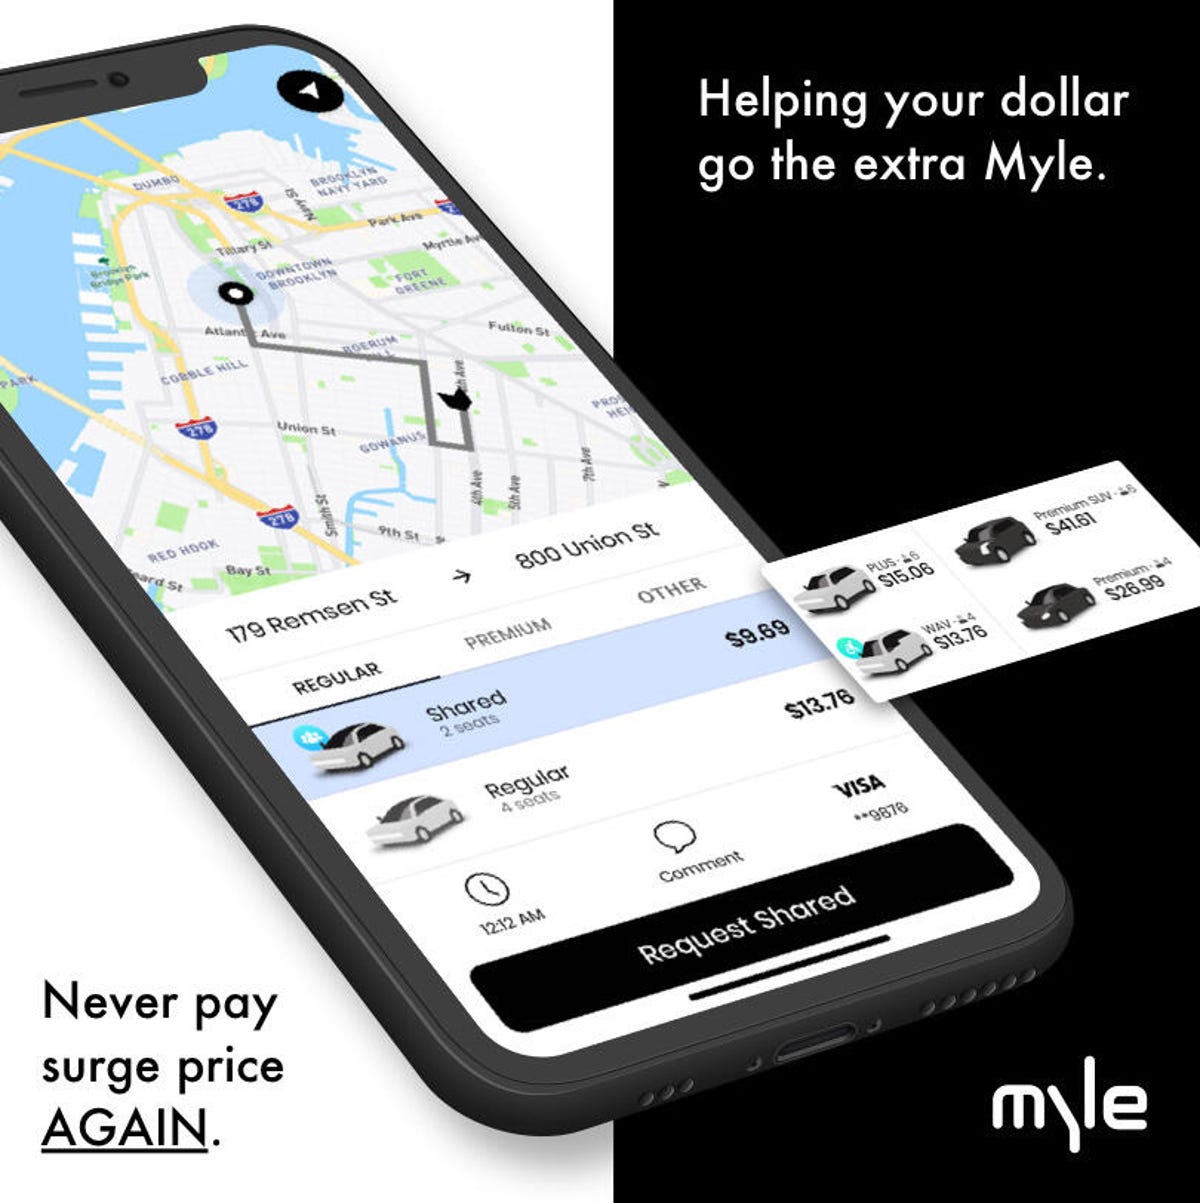 Myle ride-hailing service for NYC